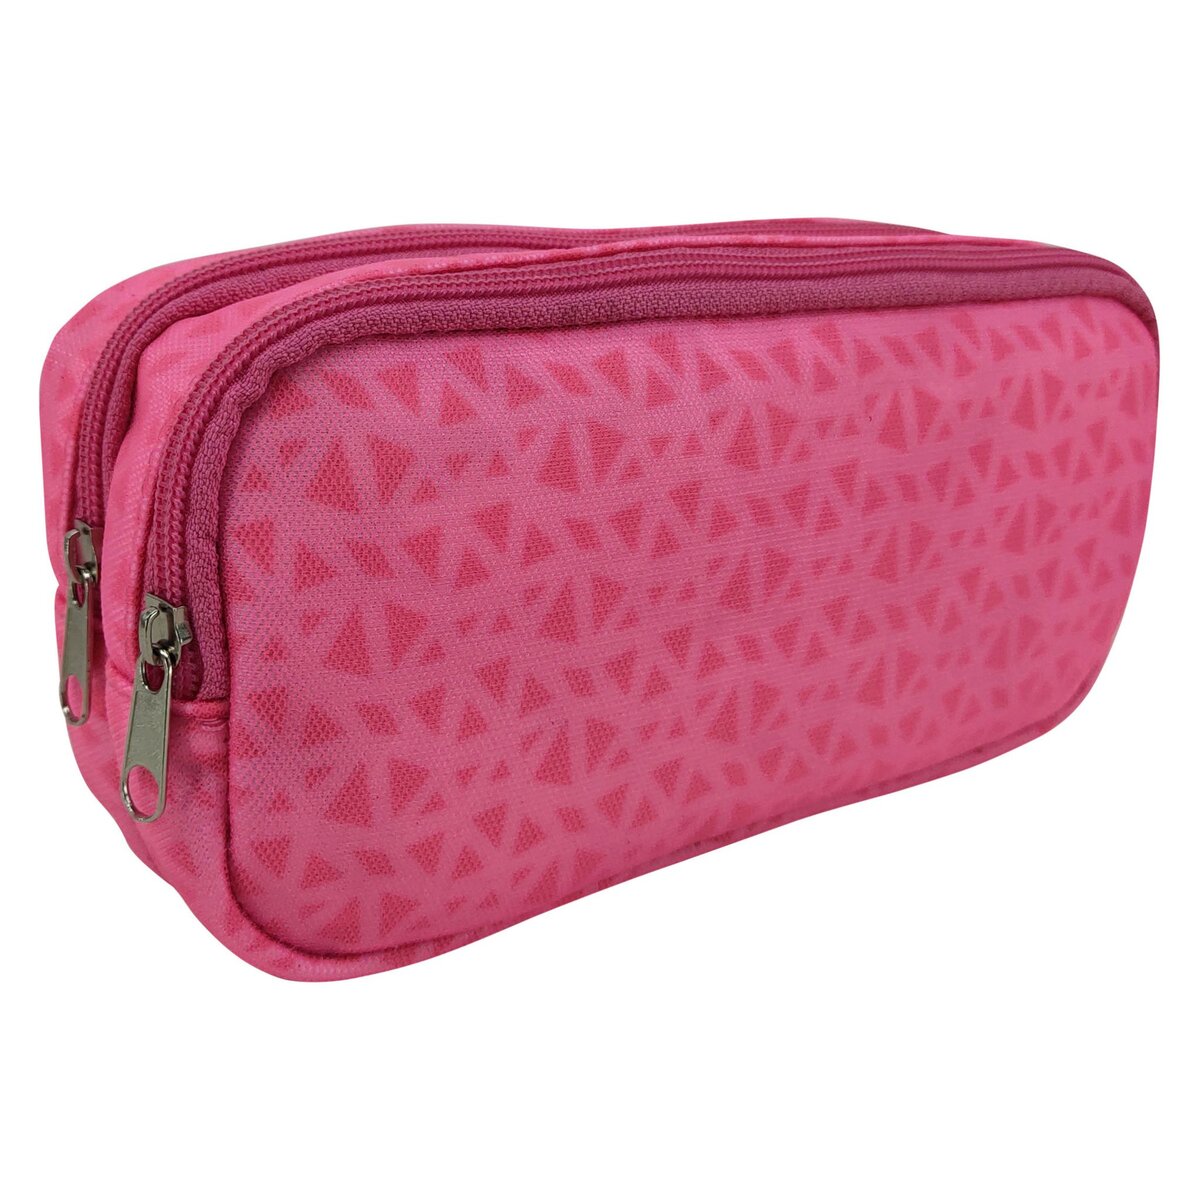 Trousse scolaire rectangulaire double compartiment polyester rose